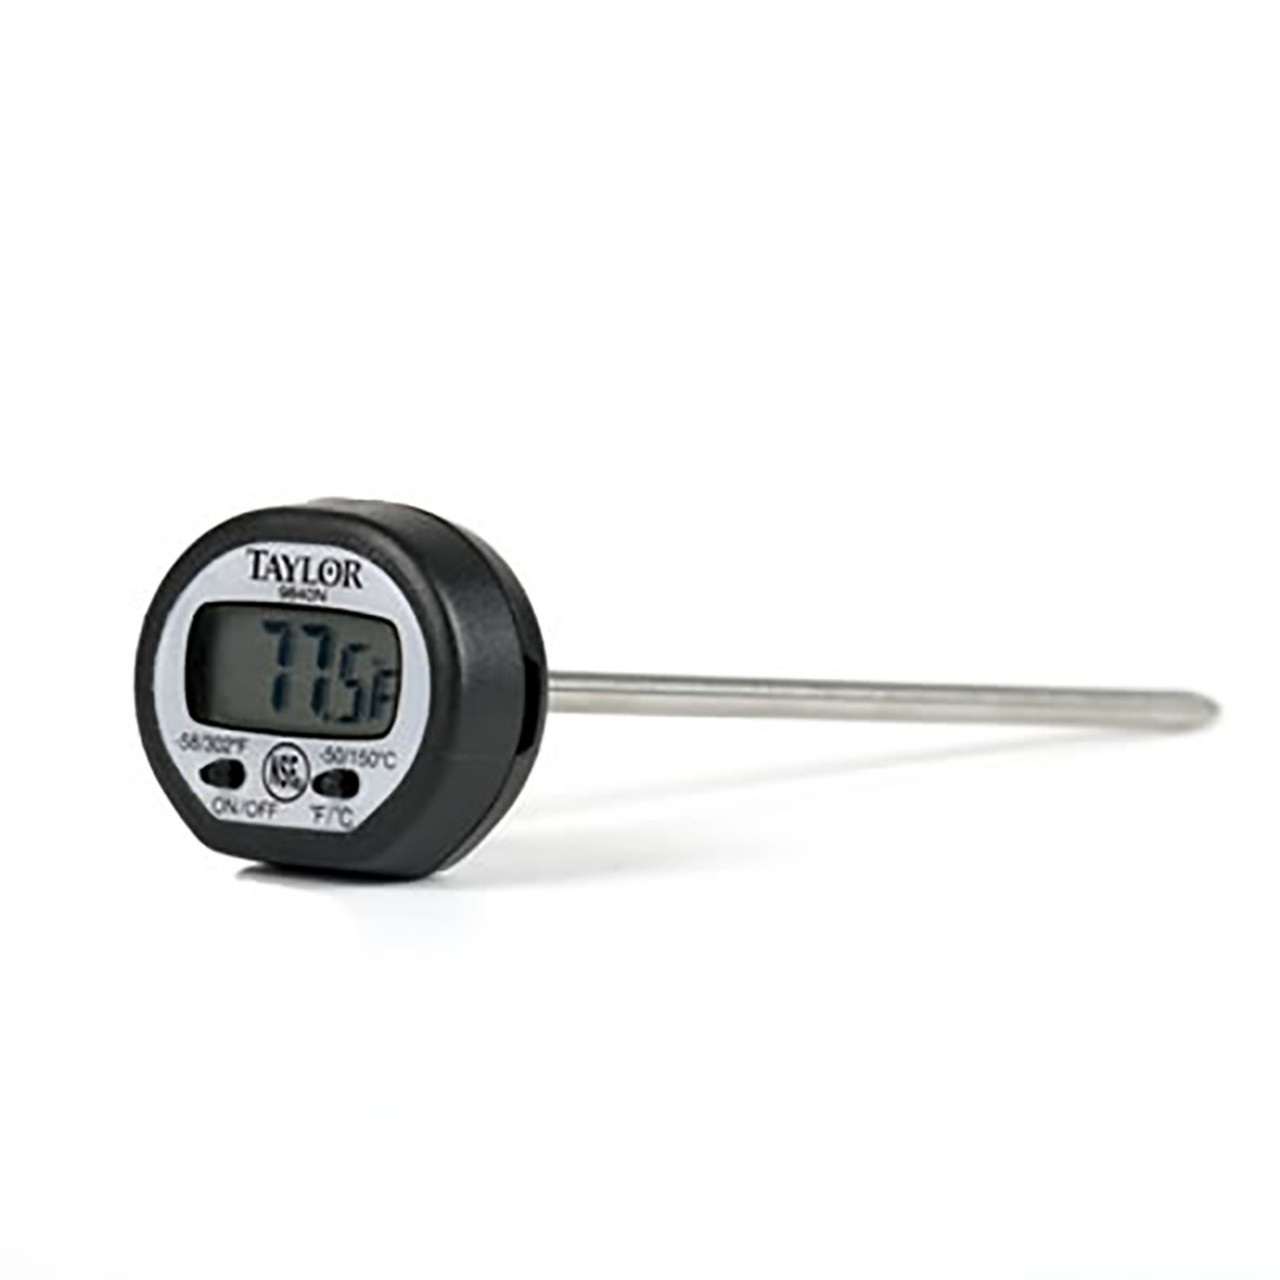 Digital Thermometer - Lone Star Candle Supply